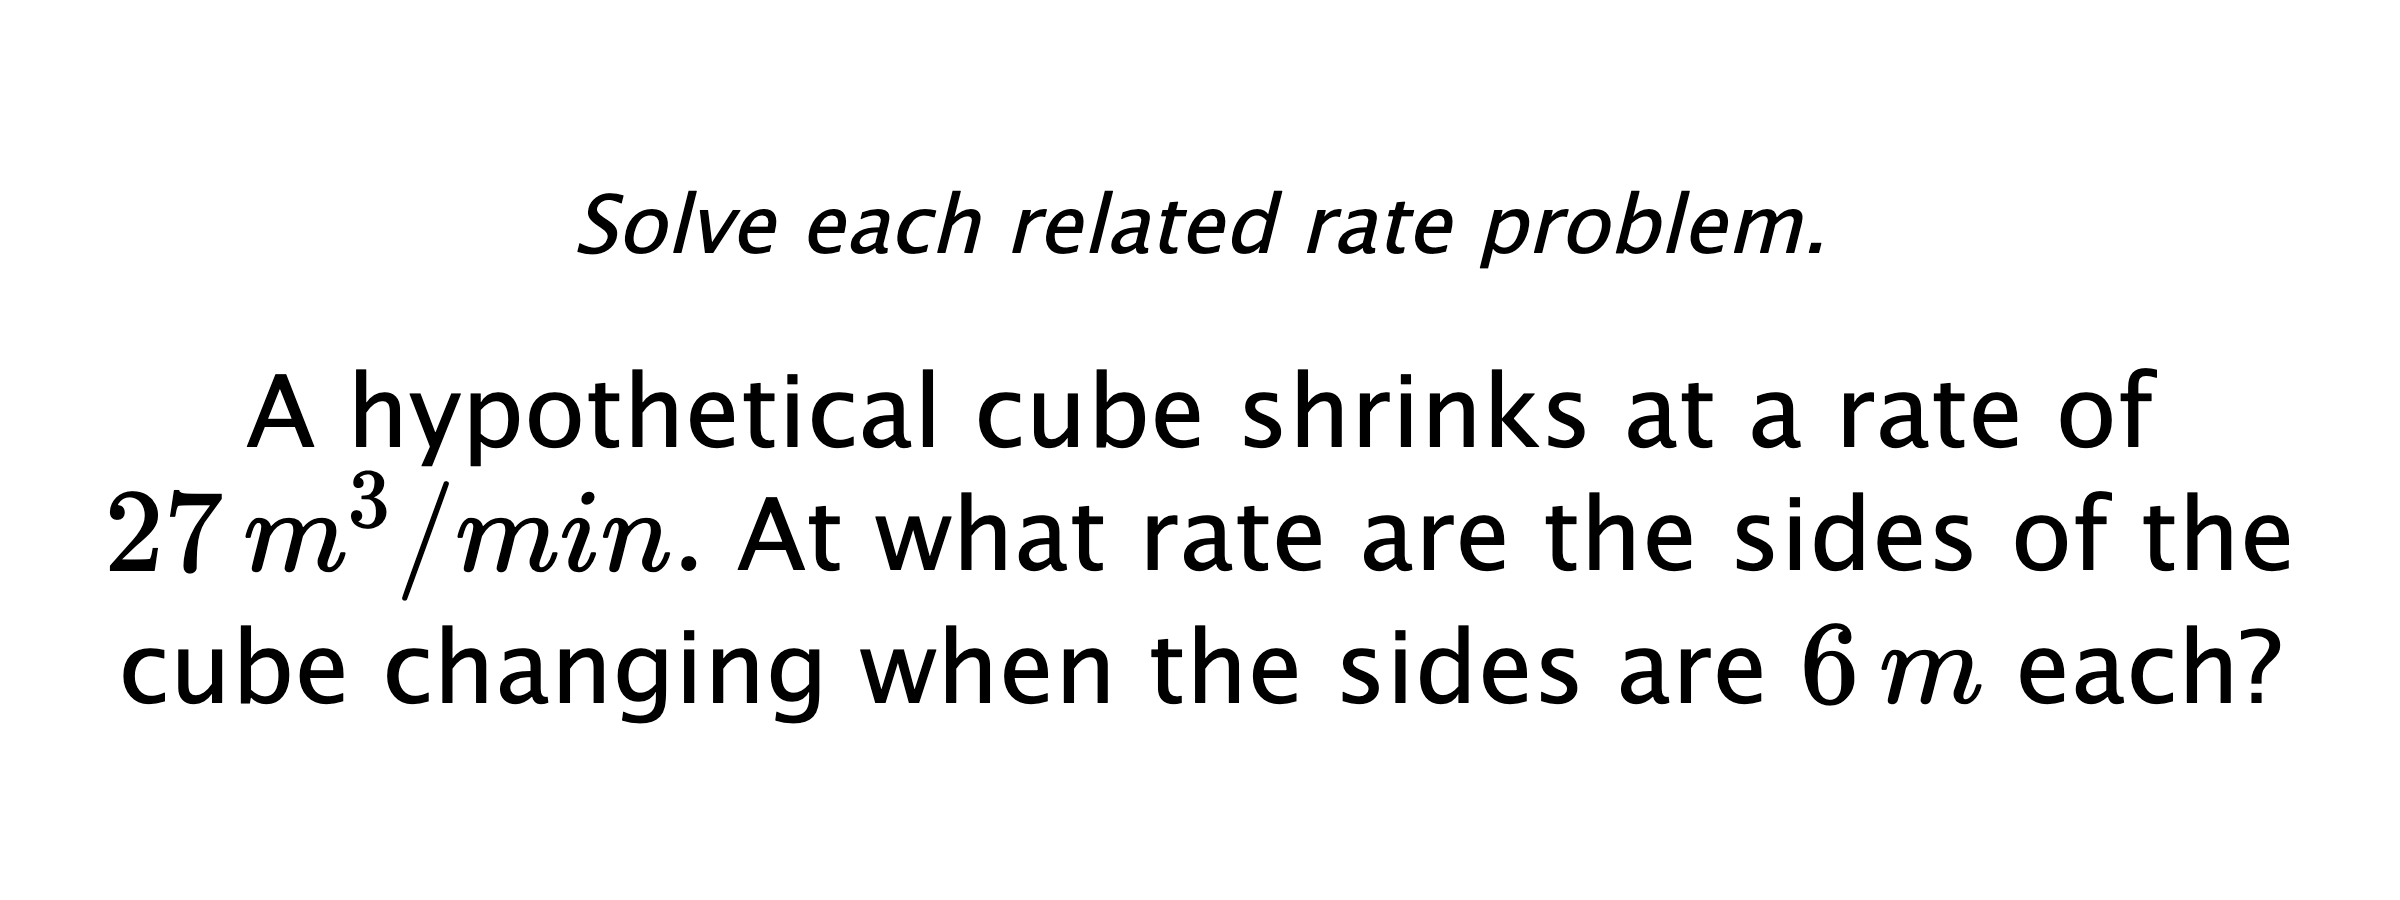 Solve each related rate problem. A hypothetical cube shrinks at a rate of $27 \,m^{3}/min.$ At what rate are the sides of the cube changing when the sides are $6\,m$ each?